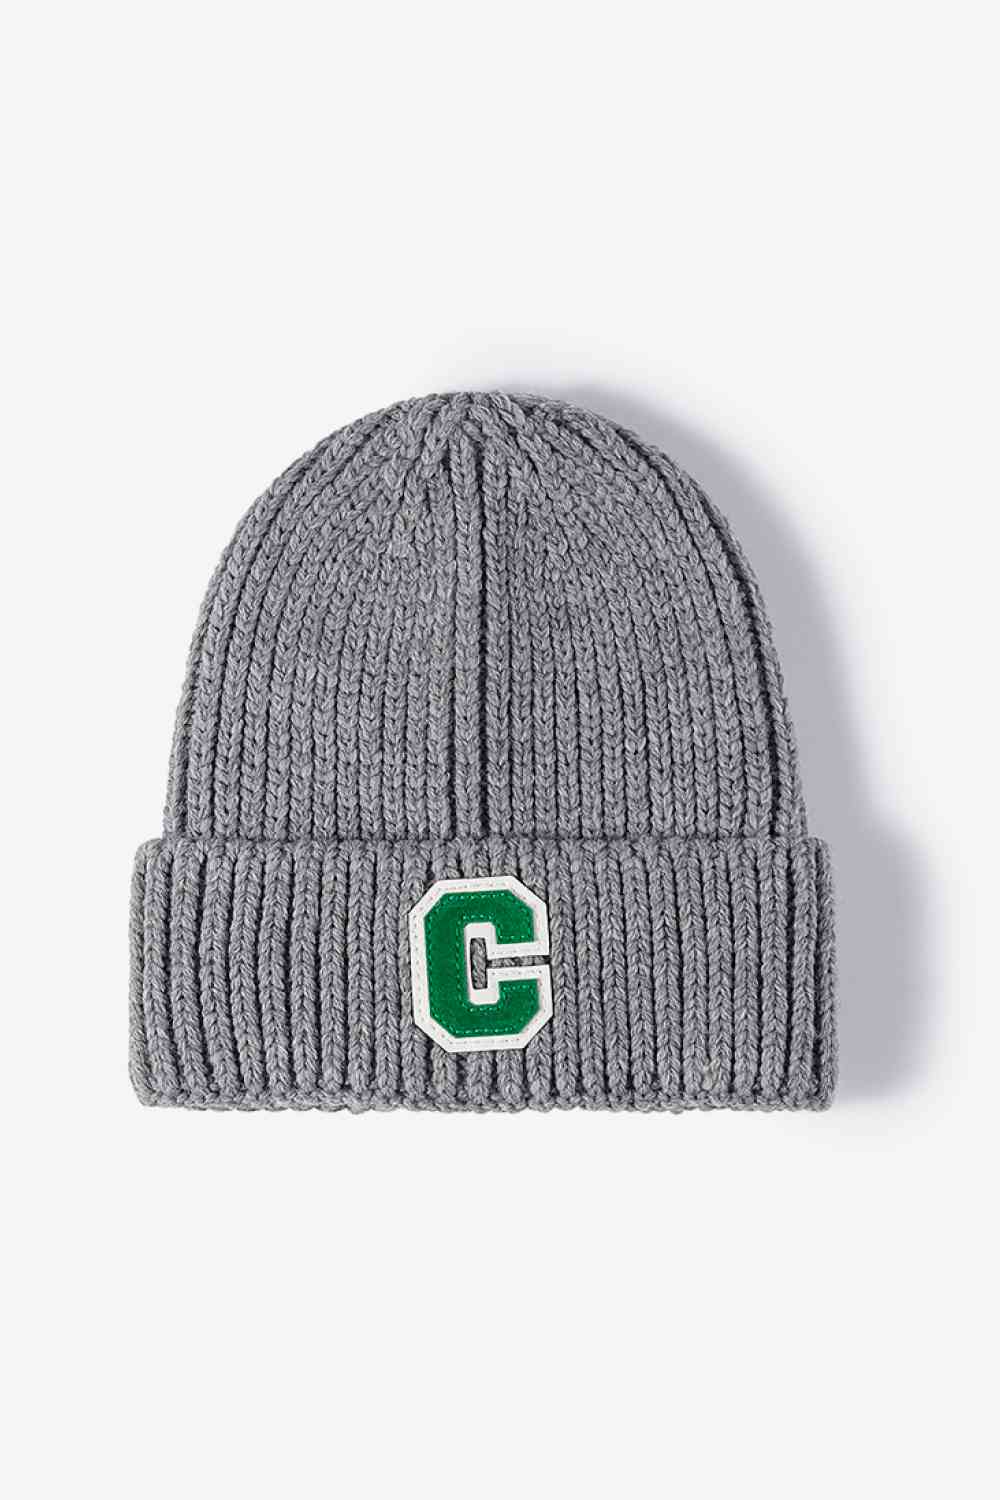 Letter C Patch Cuffed Beanie Gray One Size